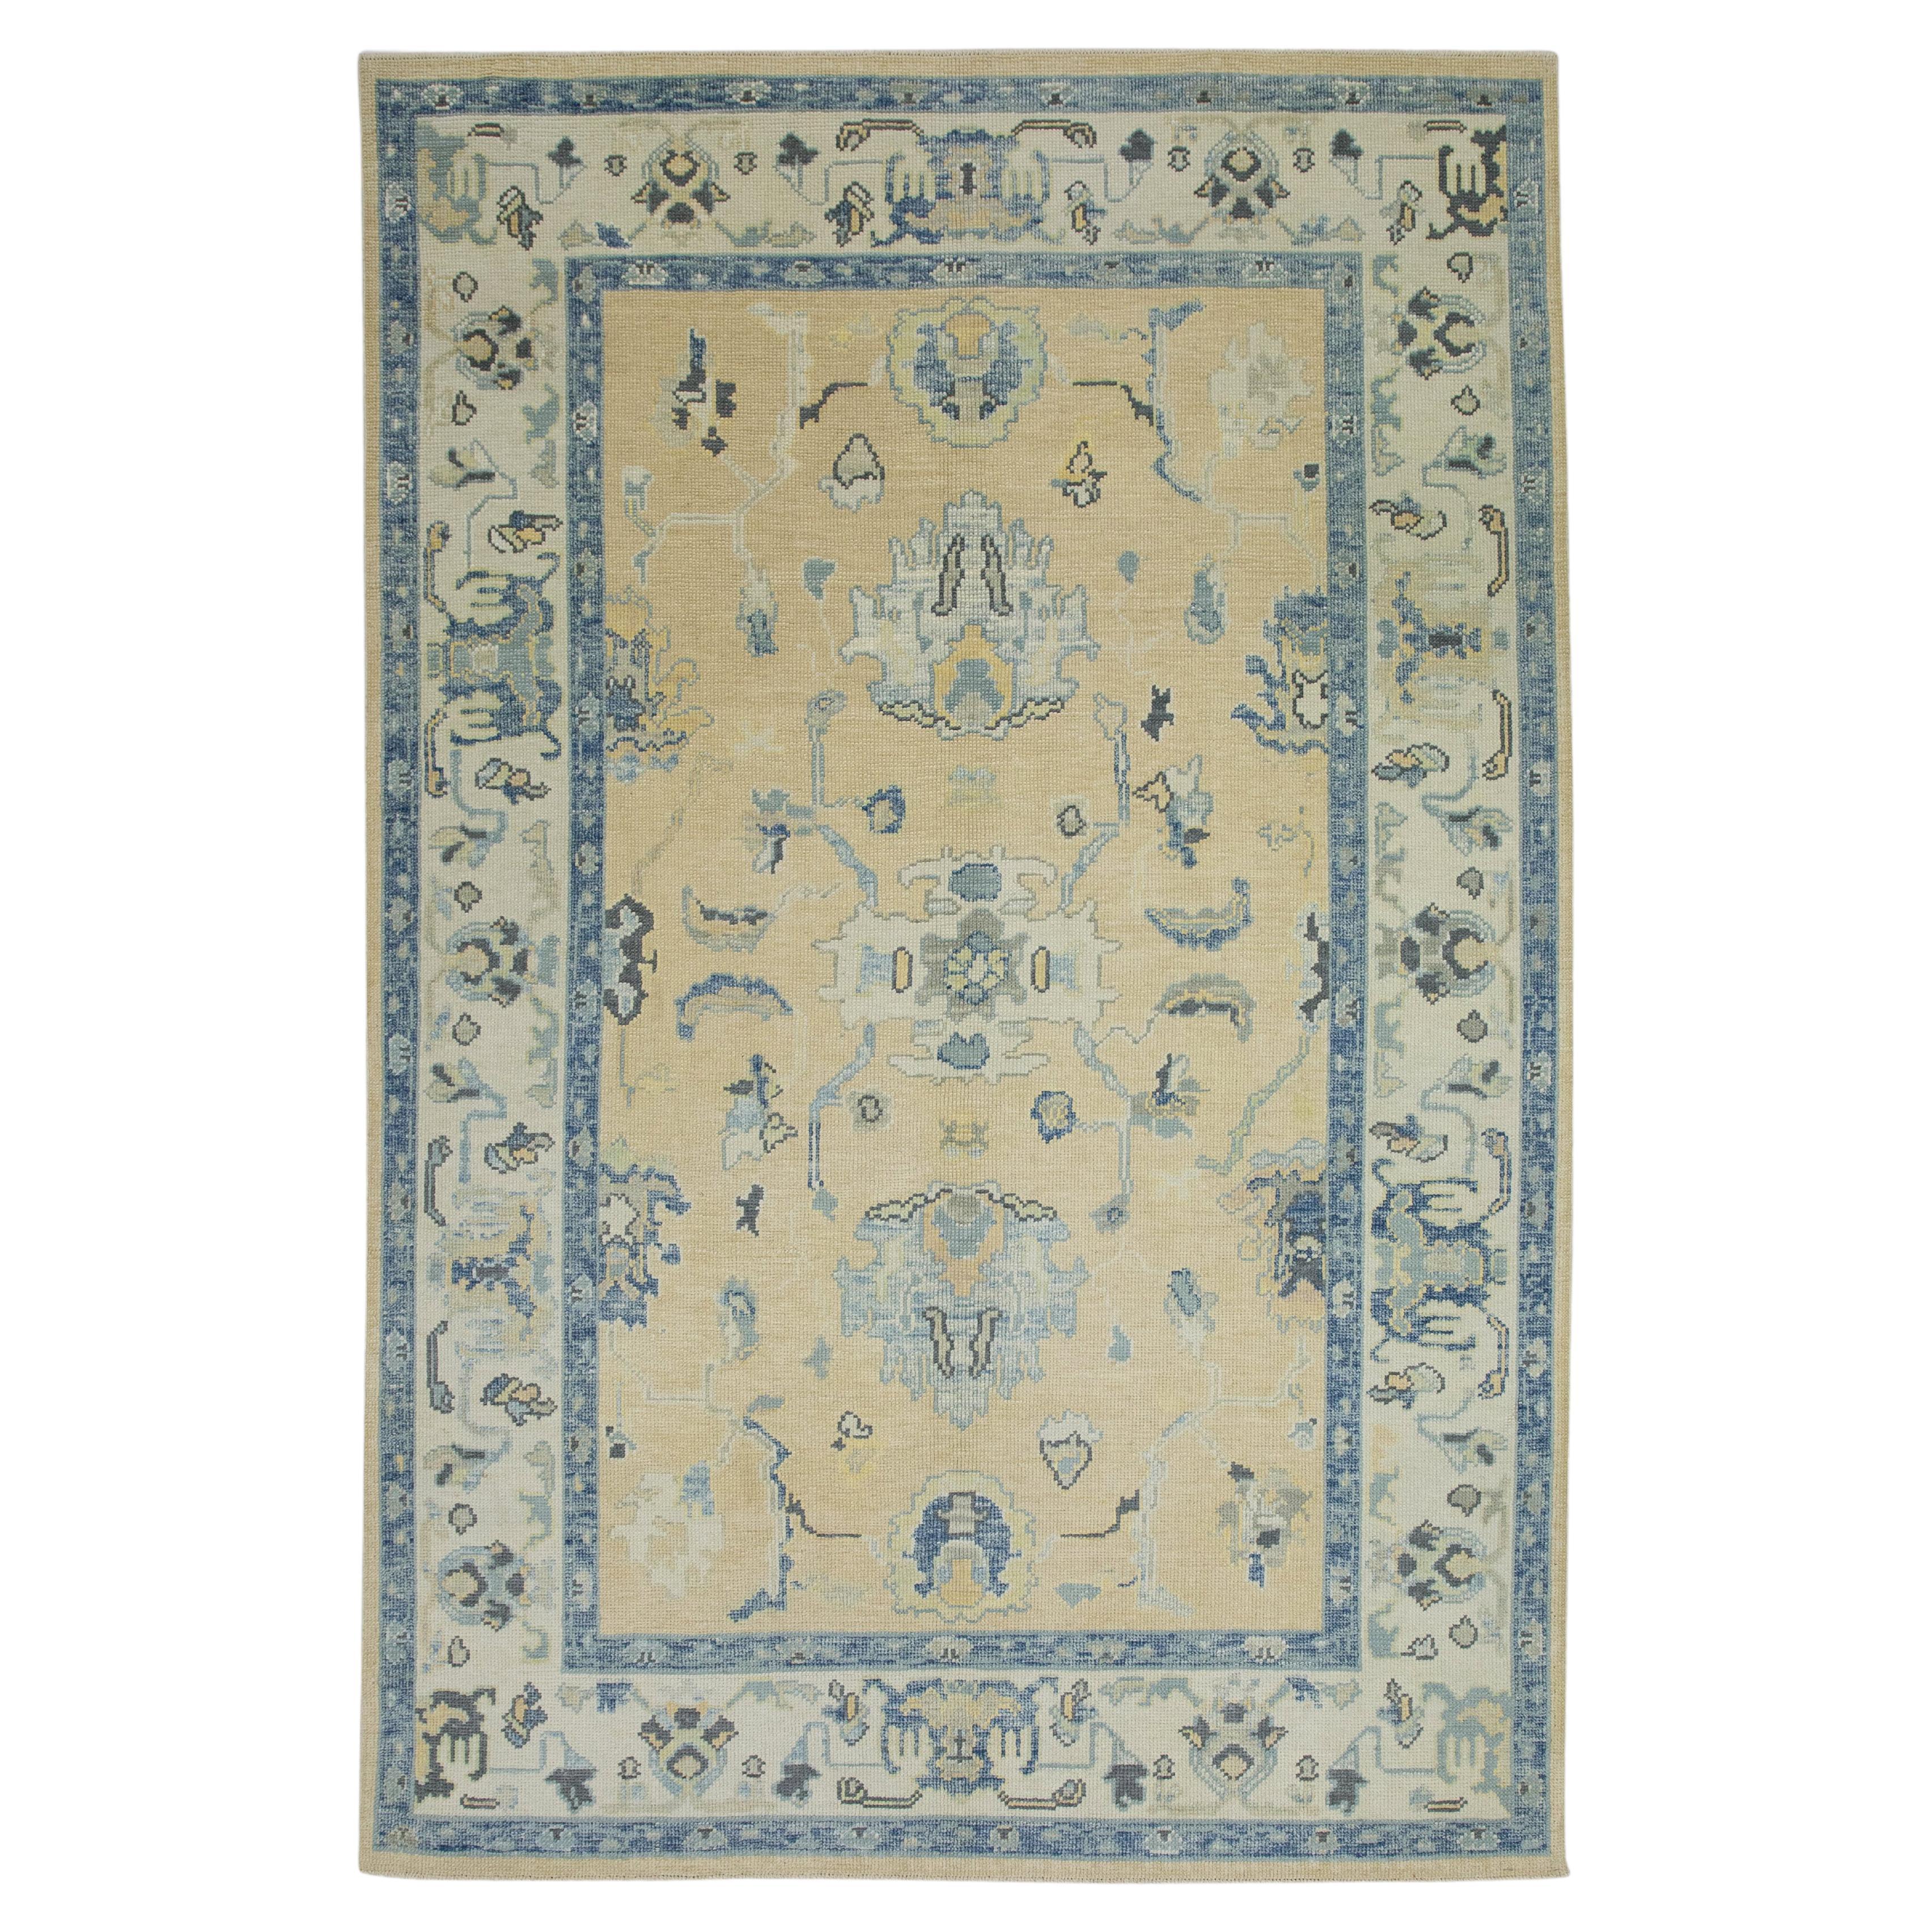 Yellow & Blue Floral Design Handwoven Wool Turkish Oushak Rug 5'10" x 8'6" For Sale